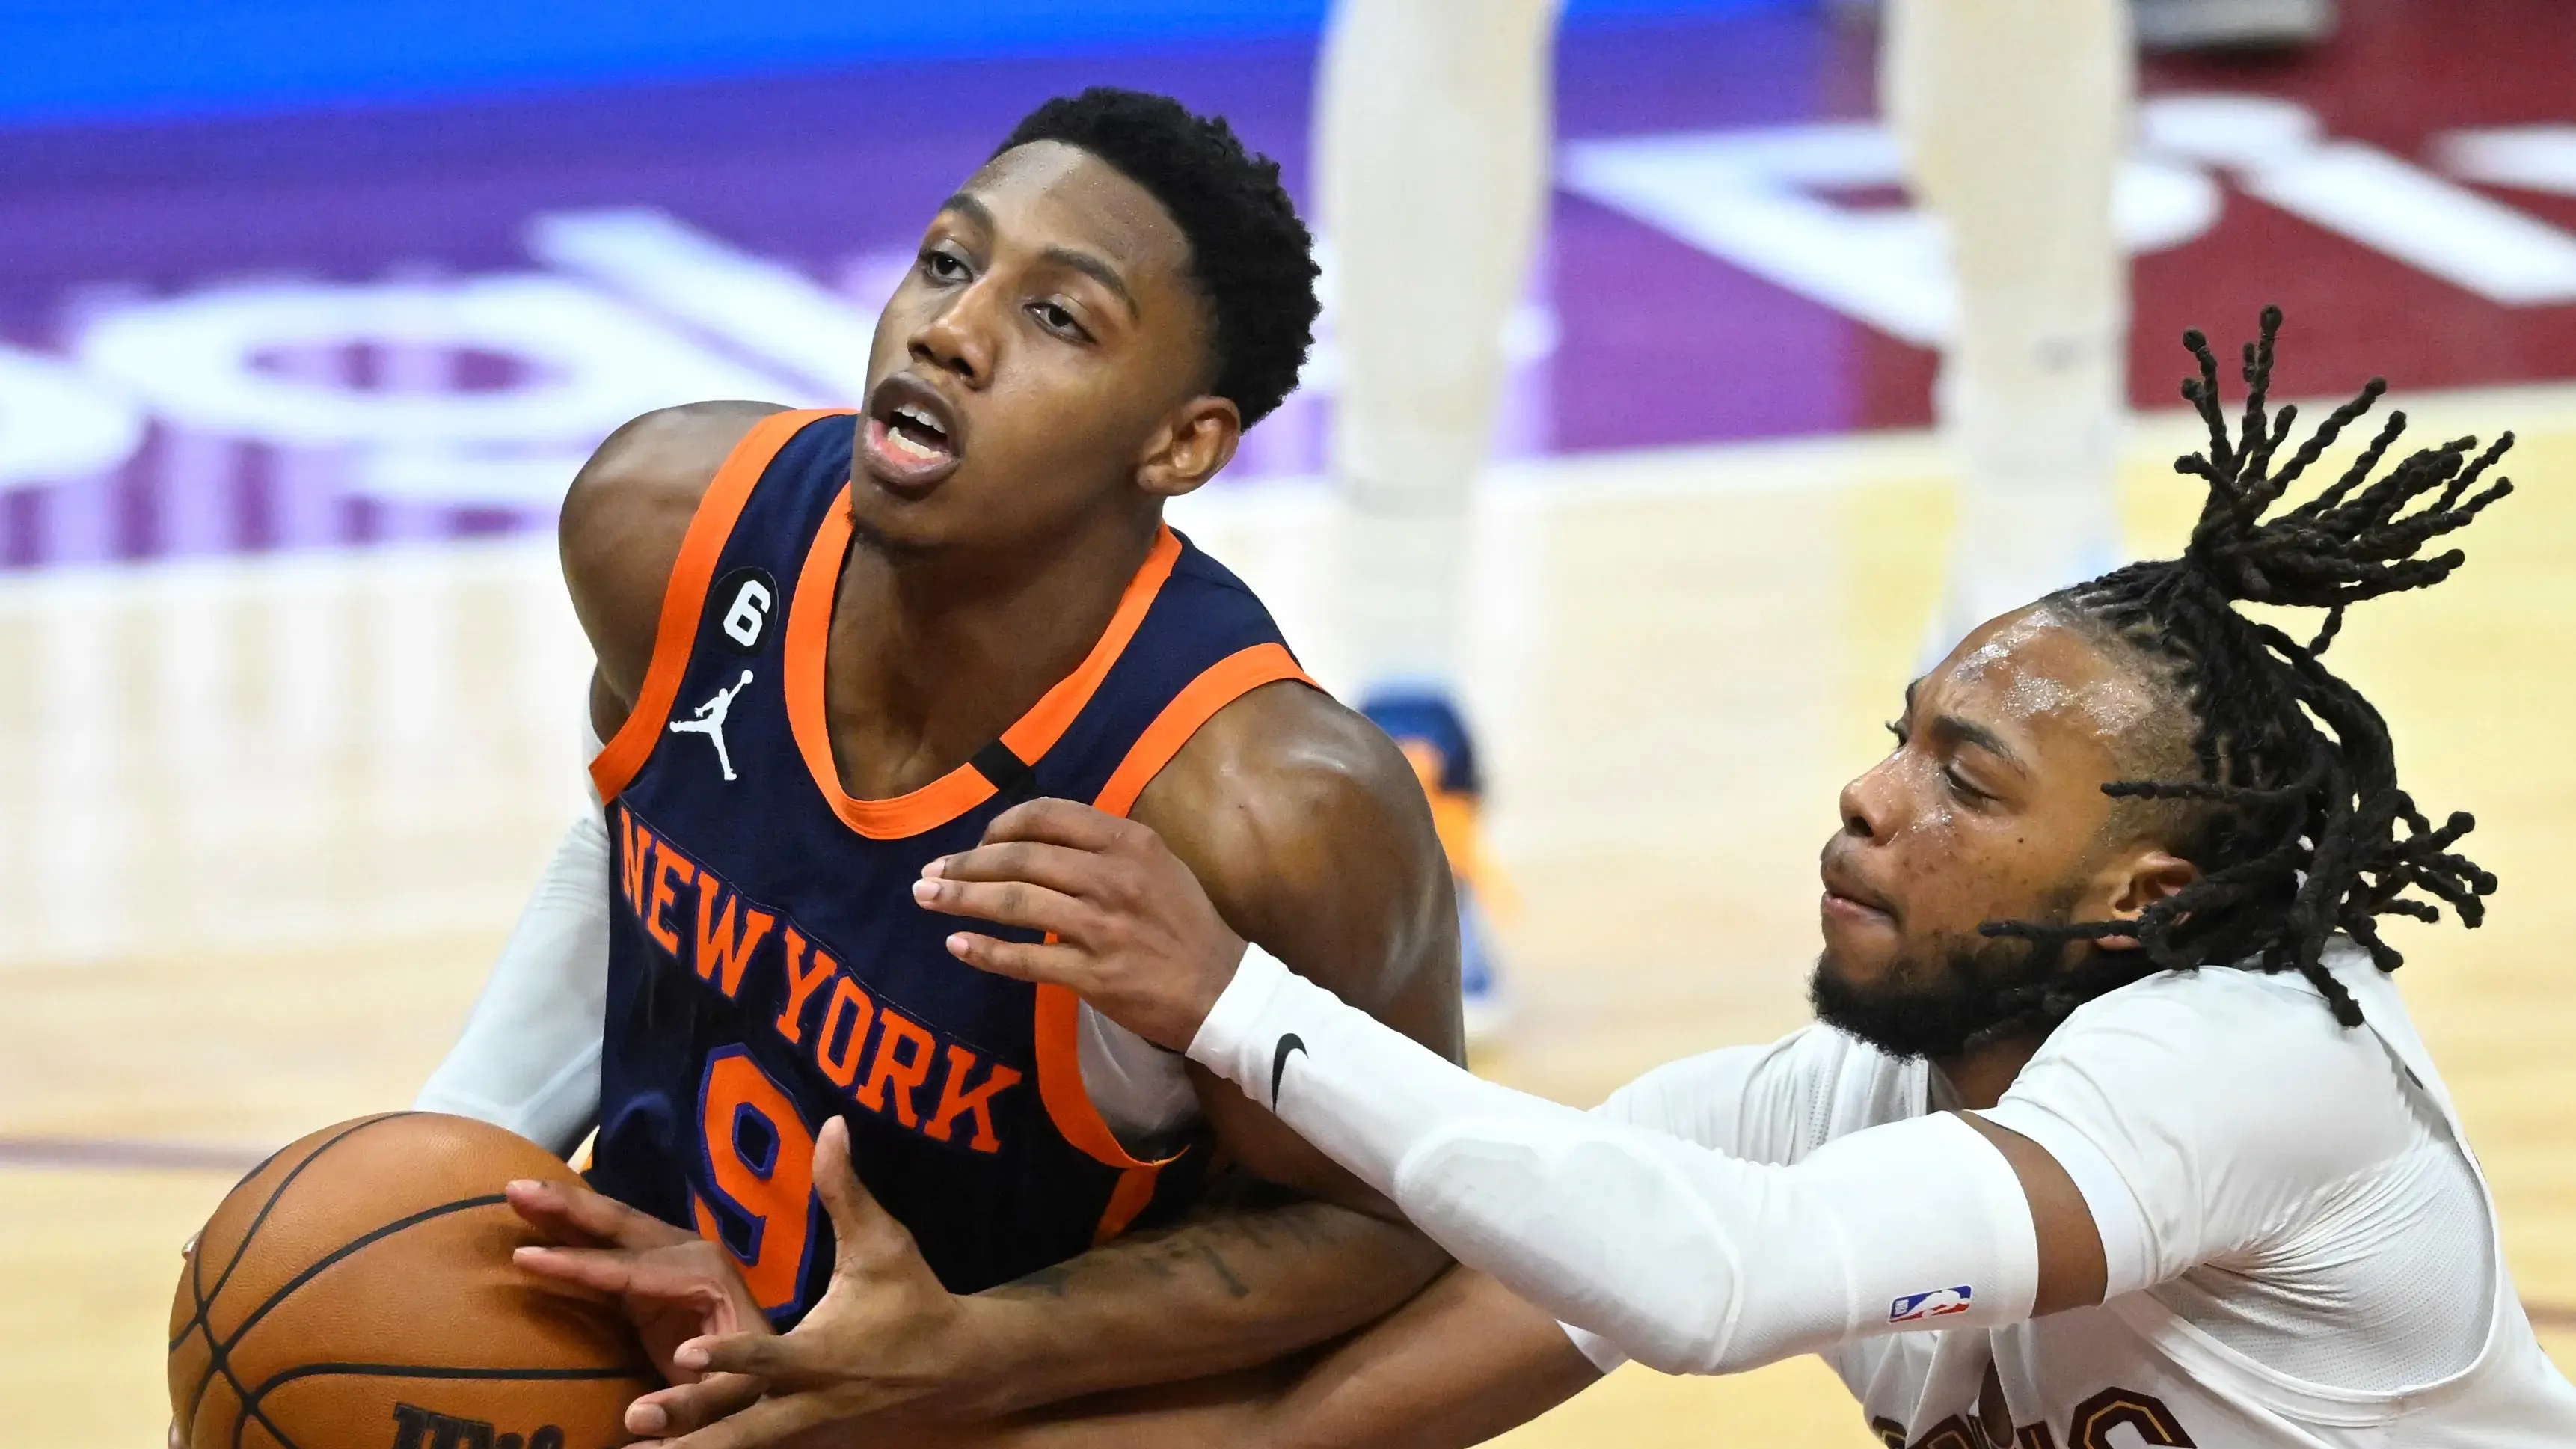 Apr 15, 2023; Cleveland, Ohio, USA; Cleveland Cavaliers guard Darius Garland (10) defends New York Knicks guard RJ Barrett (9) in the fourth quarter of game one of the 2023 NBA playoffs at Rocket Mortgage FieldHouse. Mandatory Credit: David Richard-USA TODAY Sports / © David Richard-USA TODAY Sports